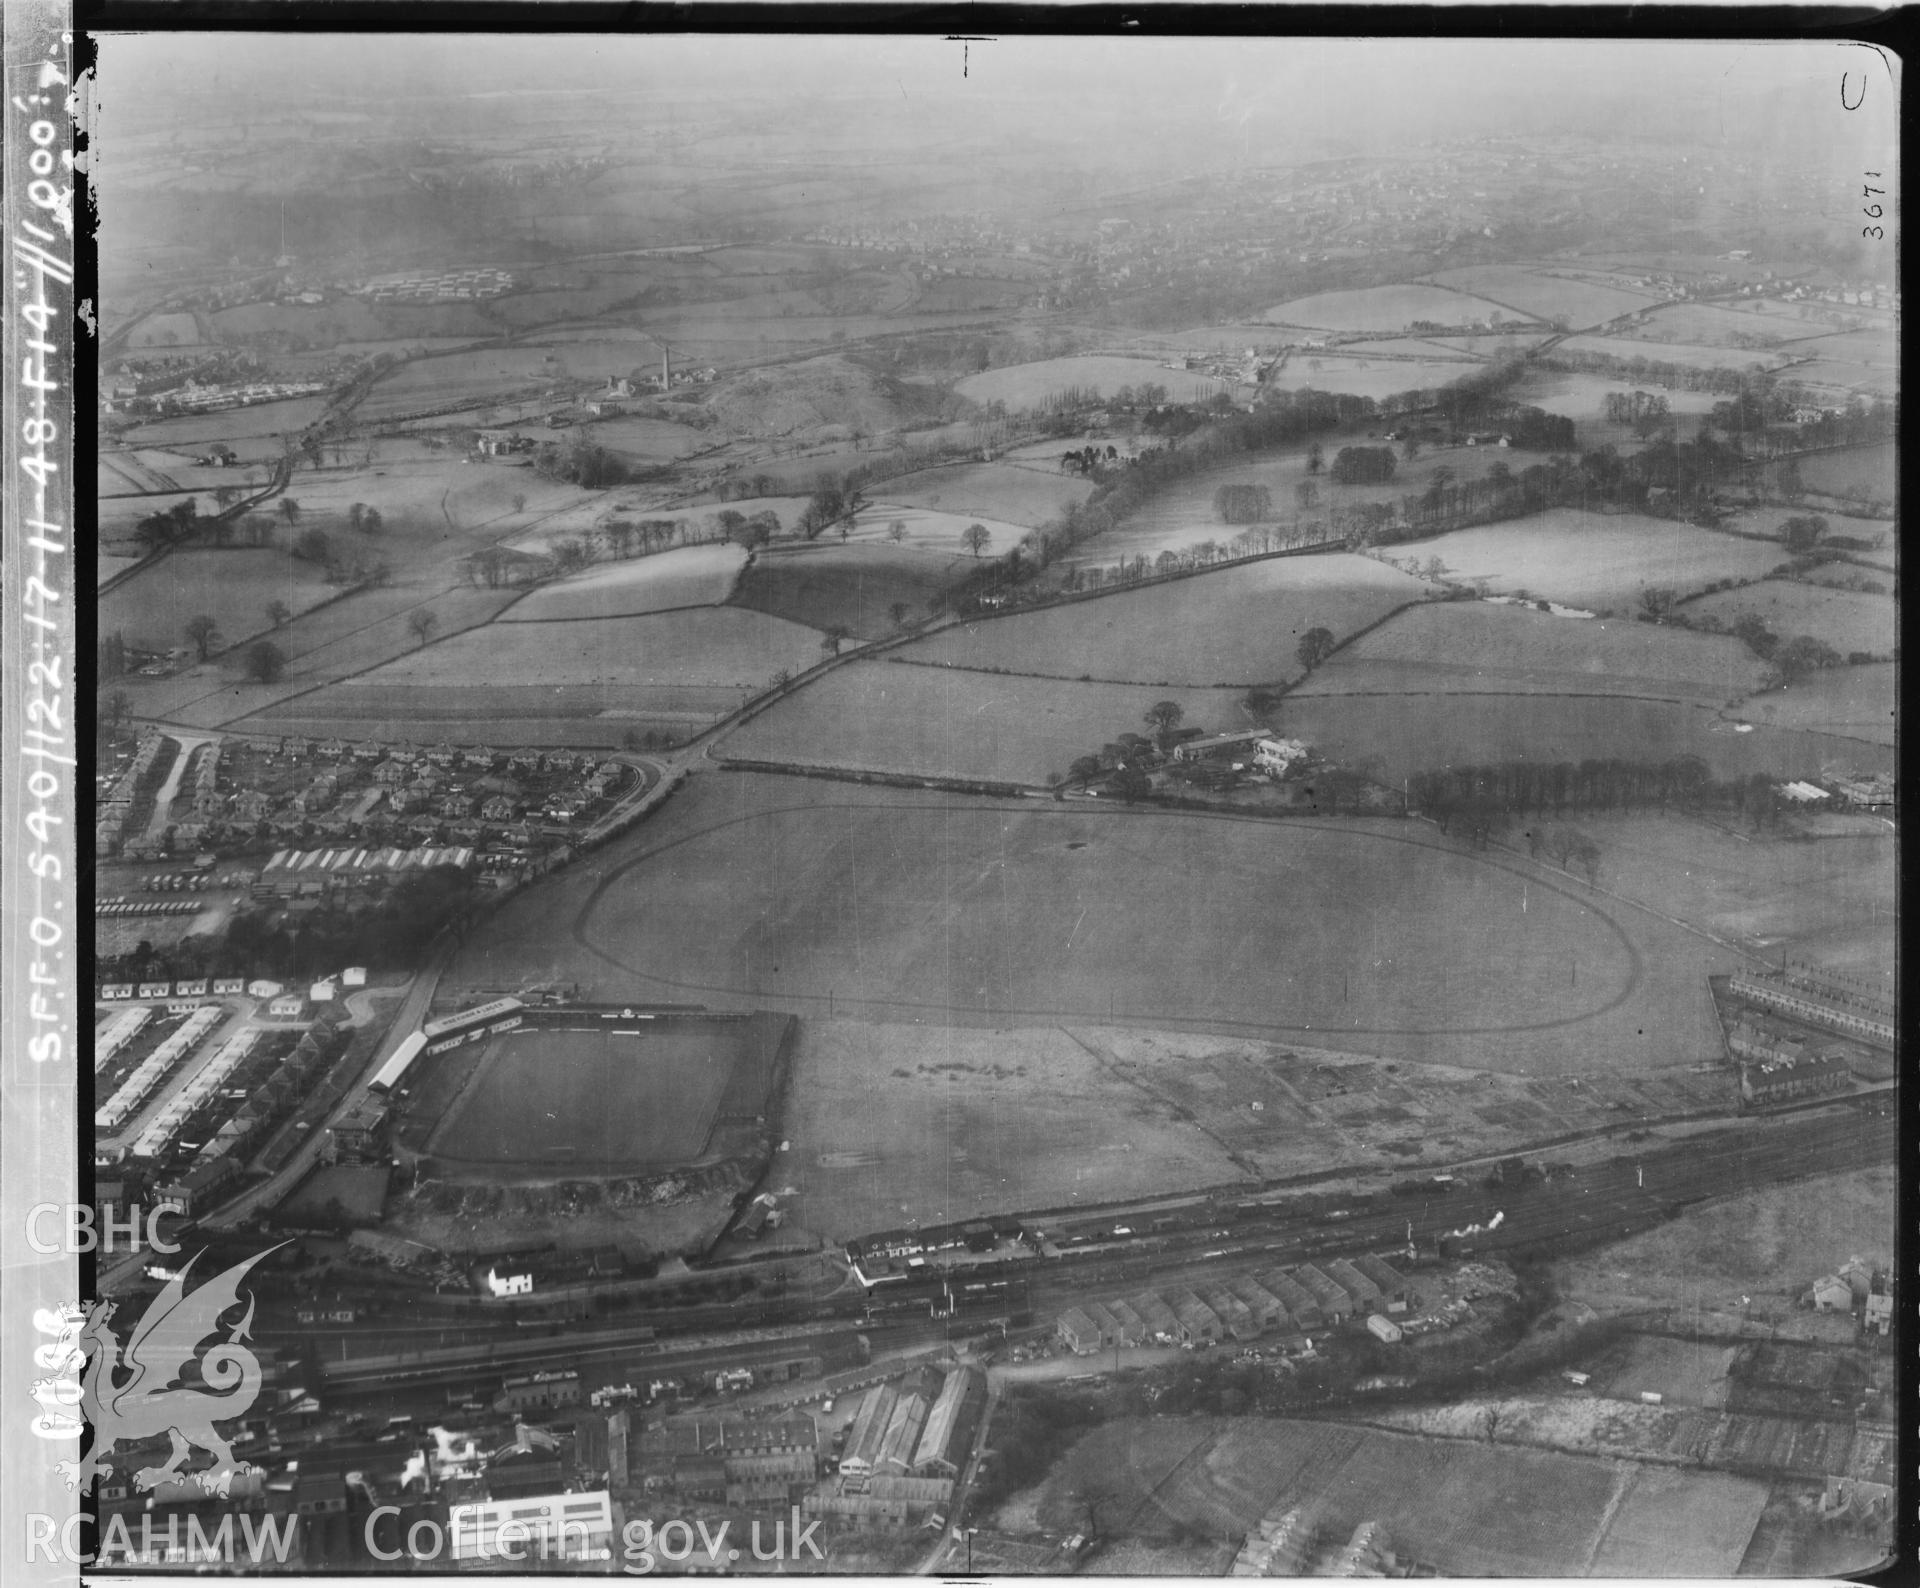 Black and white vertical aerial photograph taken by the RAF on 17/11/1948 showing the Racecourse at Wrexham.